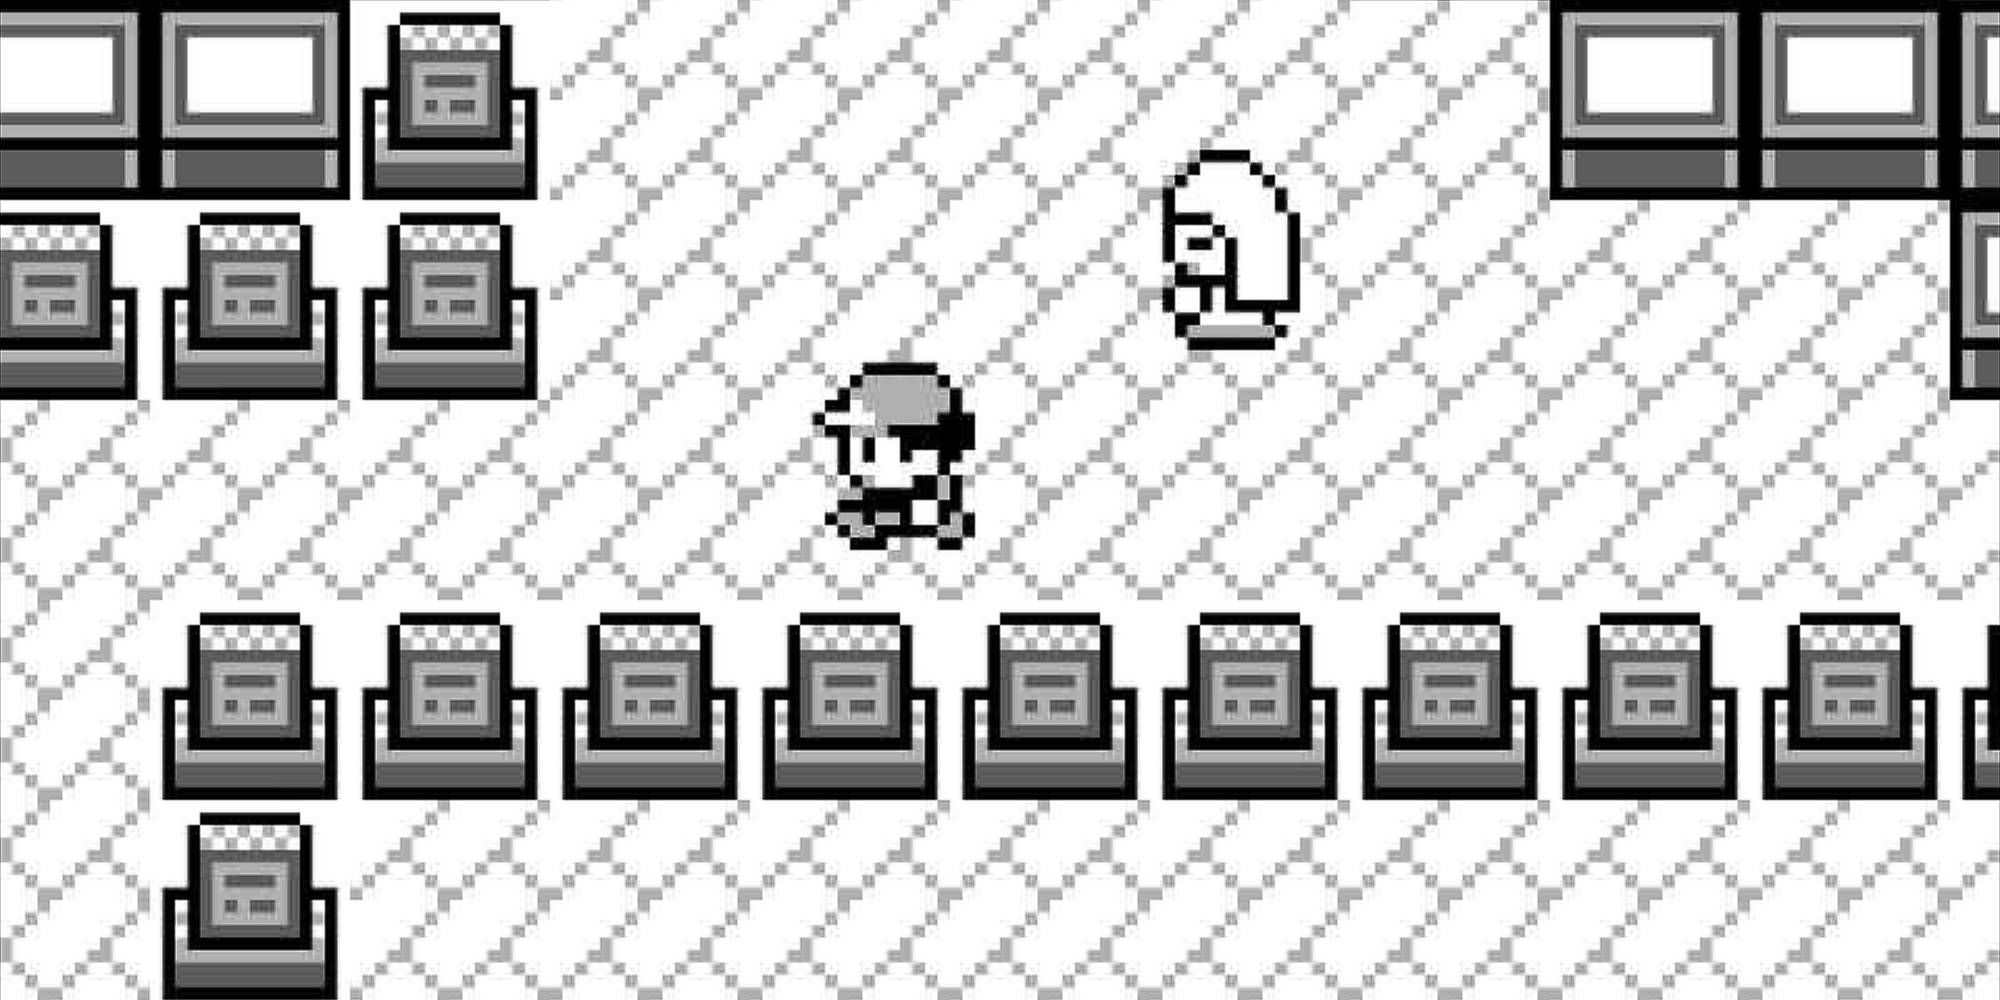 The graves in the Pokemon Tower from Pokemon Red and Pokemon Blue